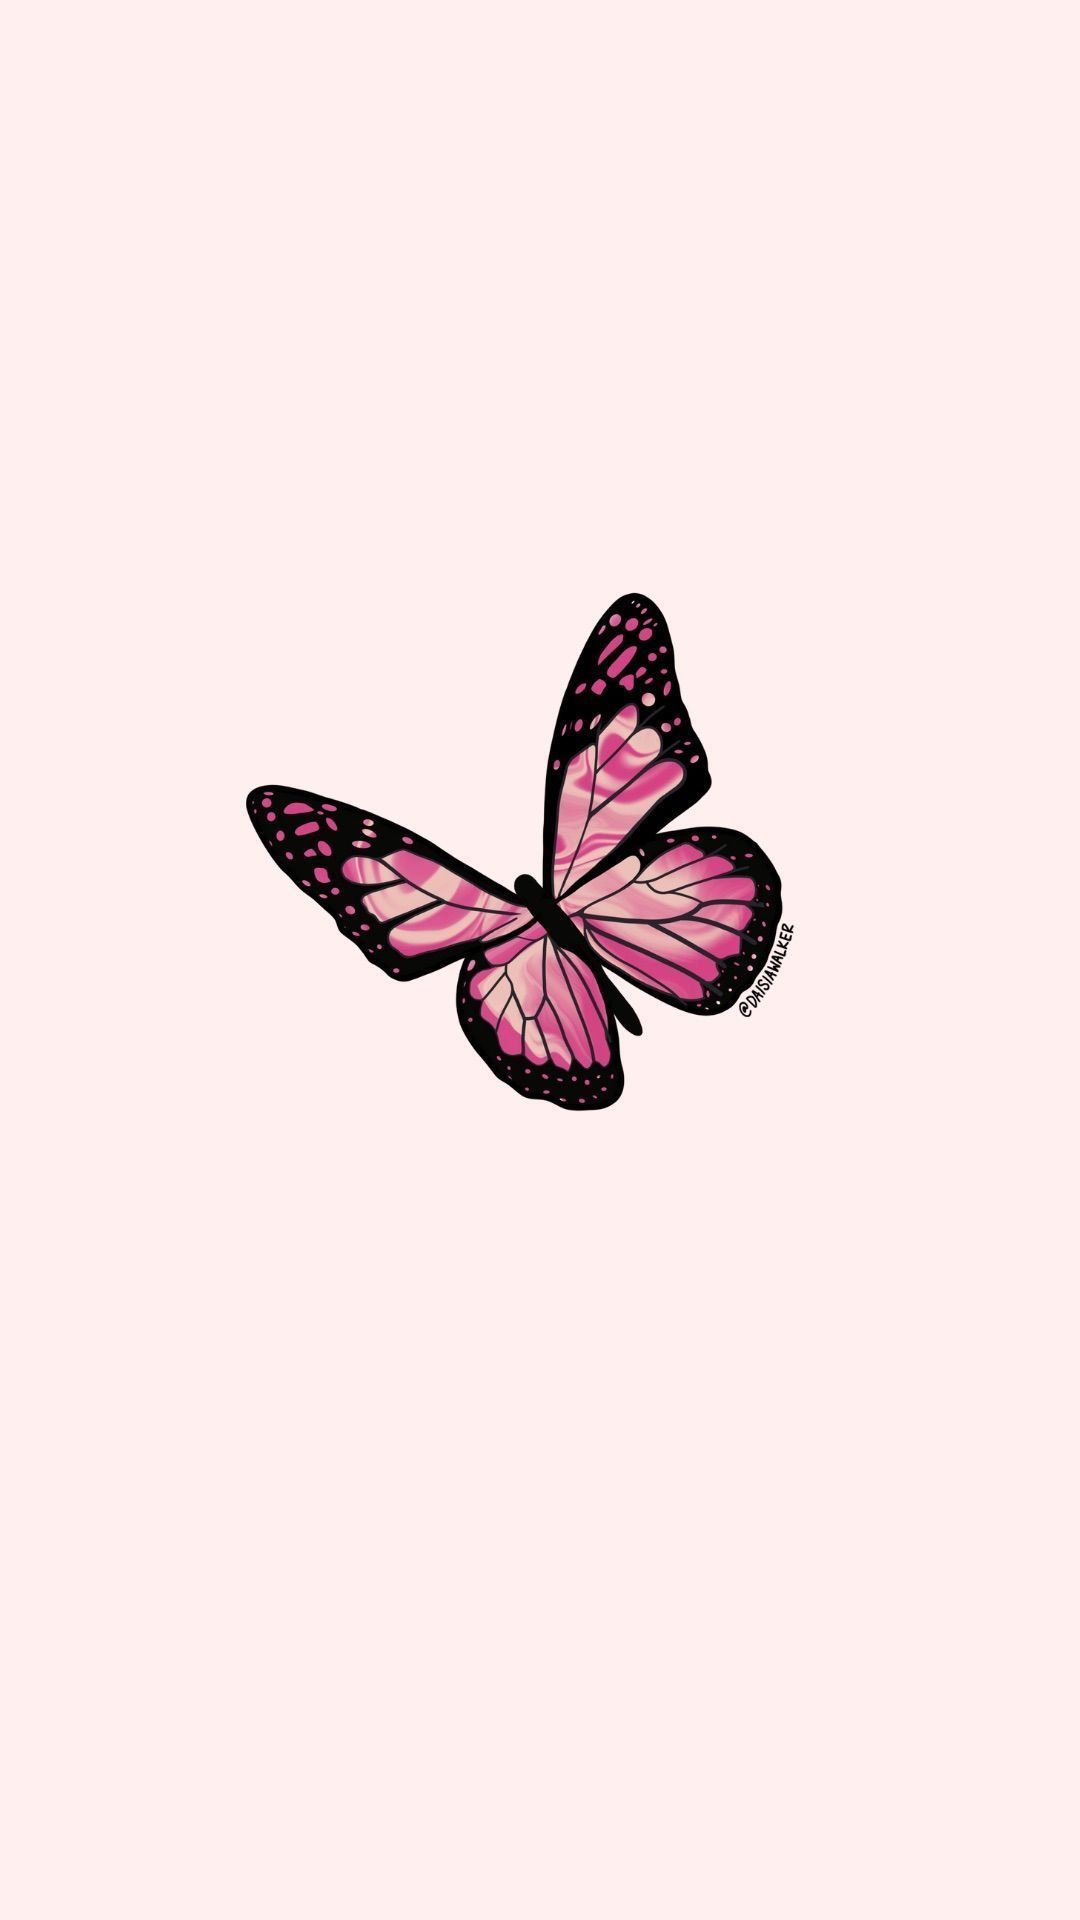 A pink butterfly on top of the wall - Butterfly